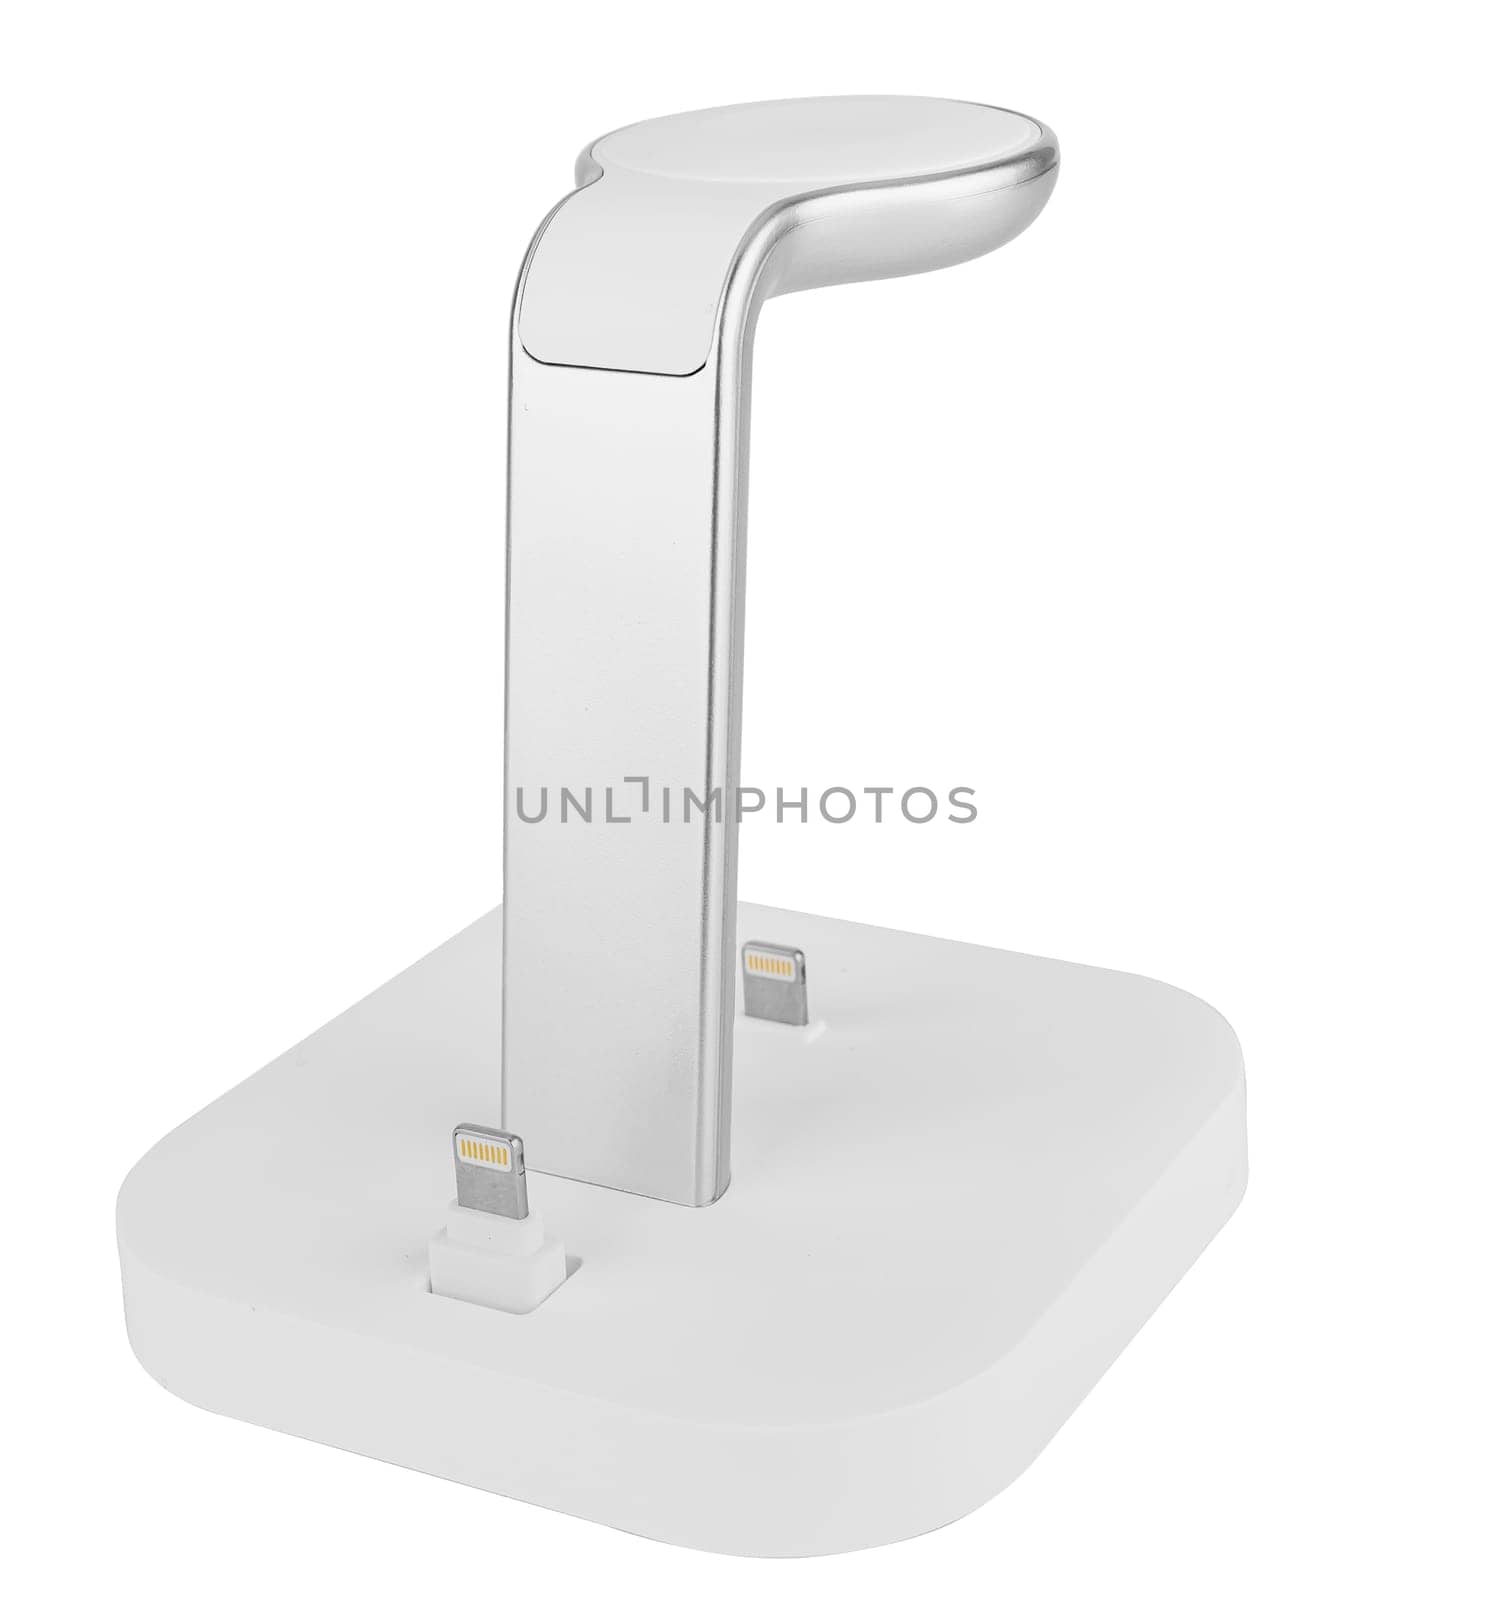 Wireless charging in the form of a phone stand